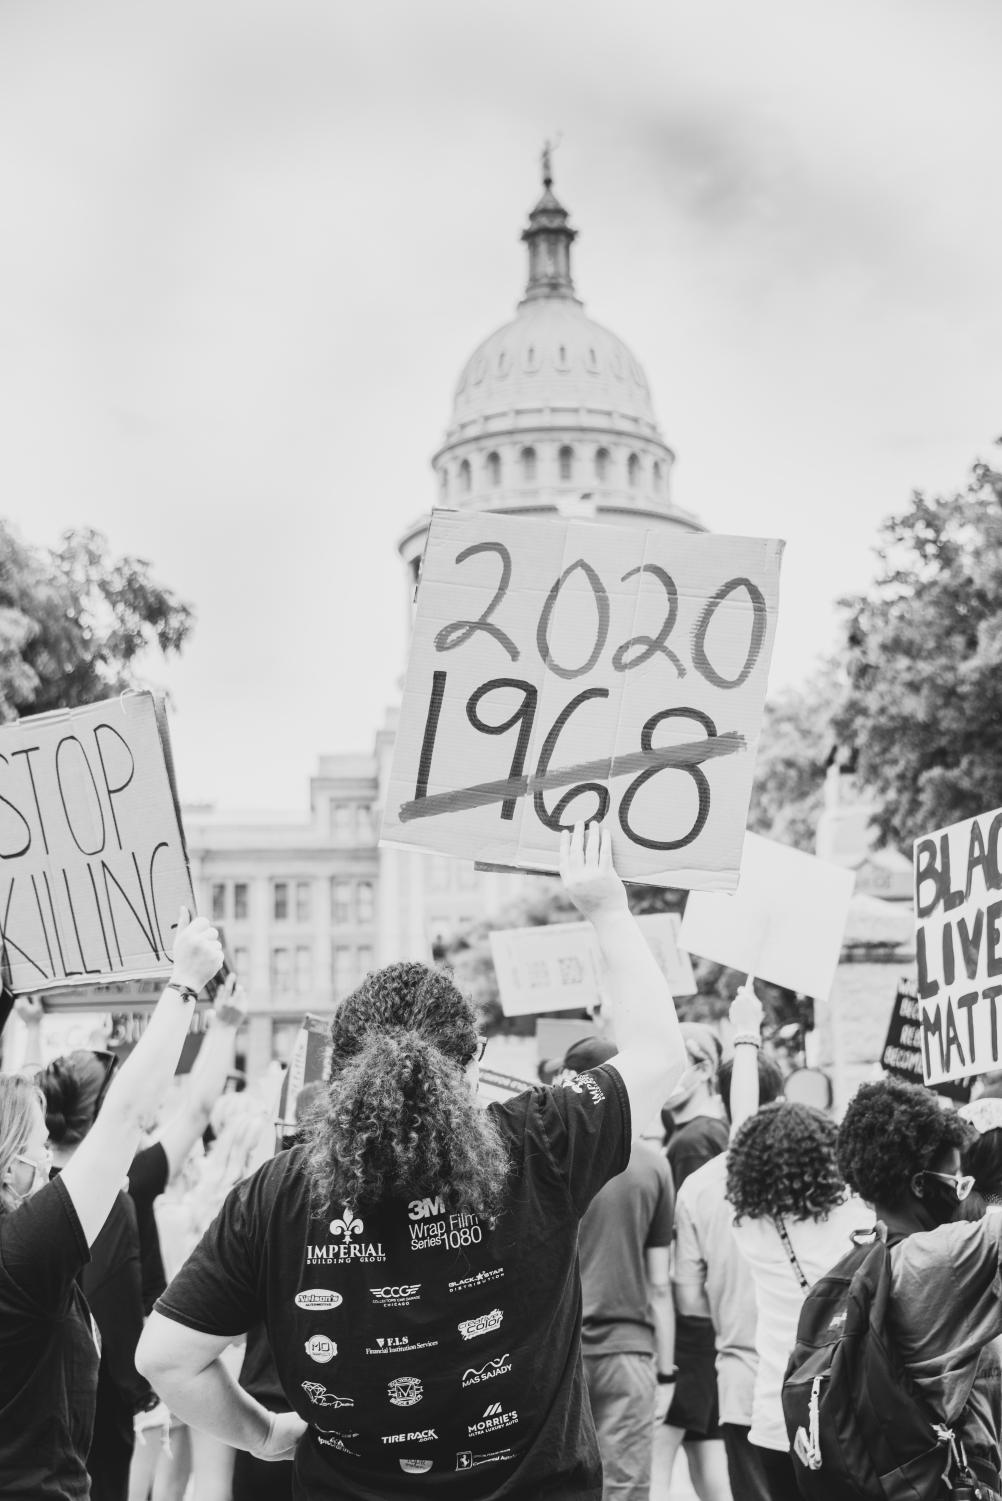 What+Do+People+Think+of+The+Austin+BLM+Protests%3F